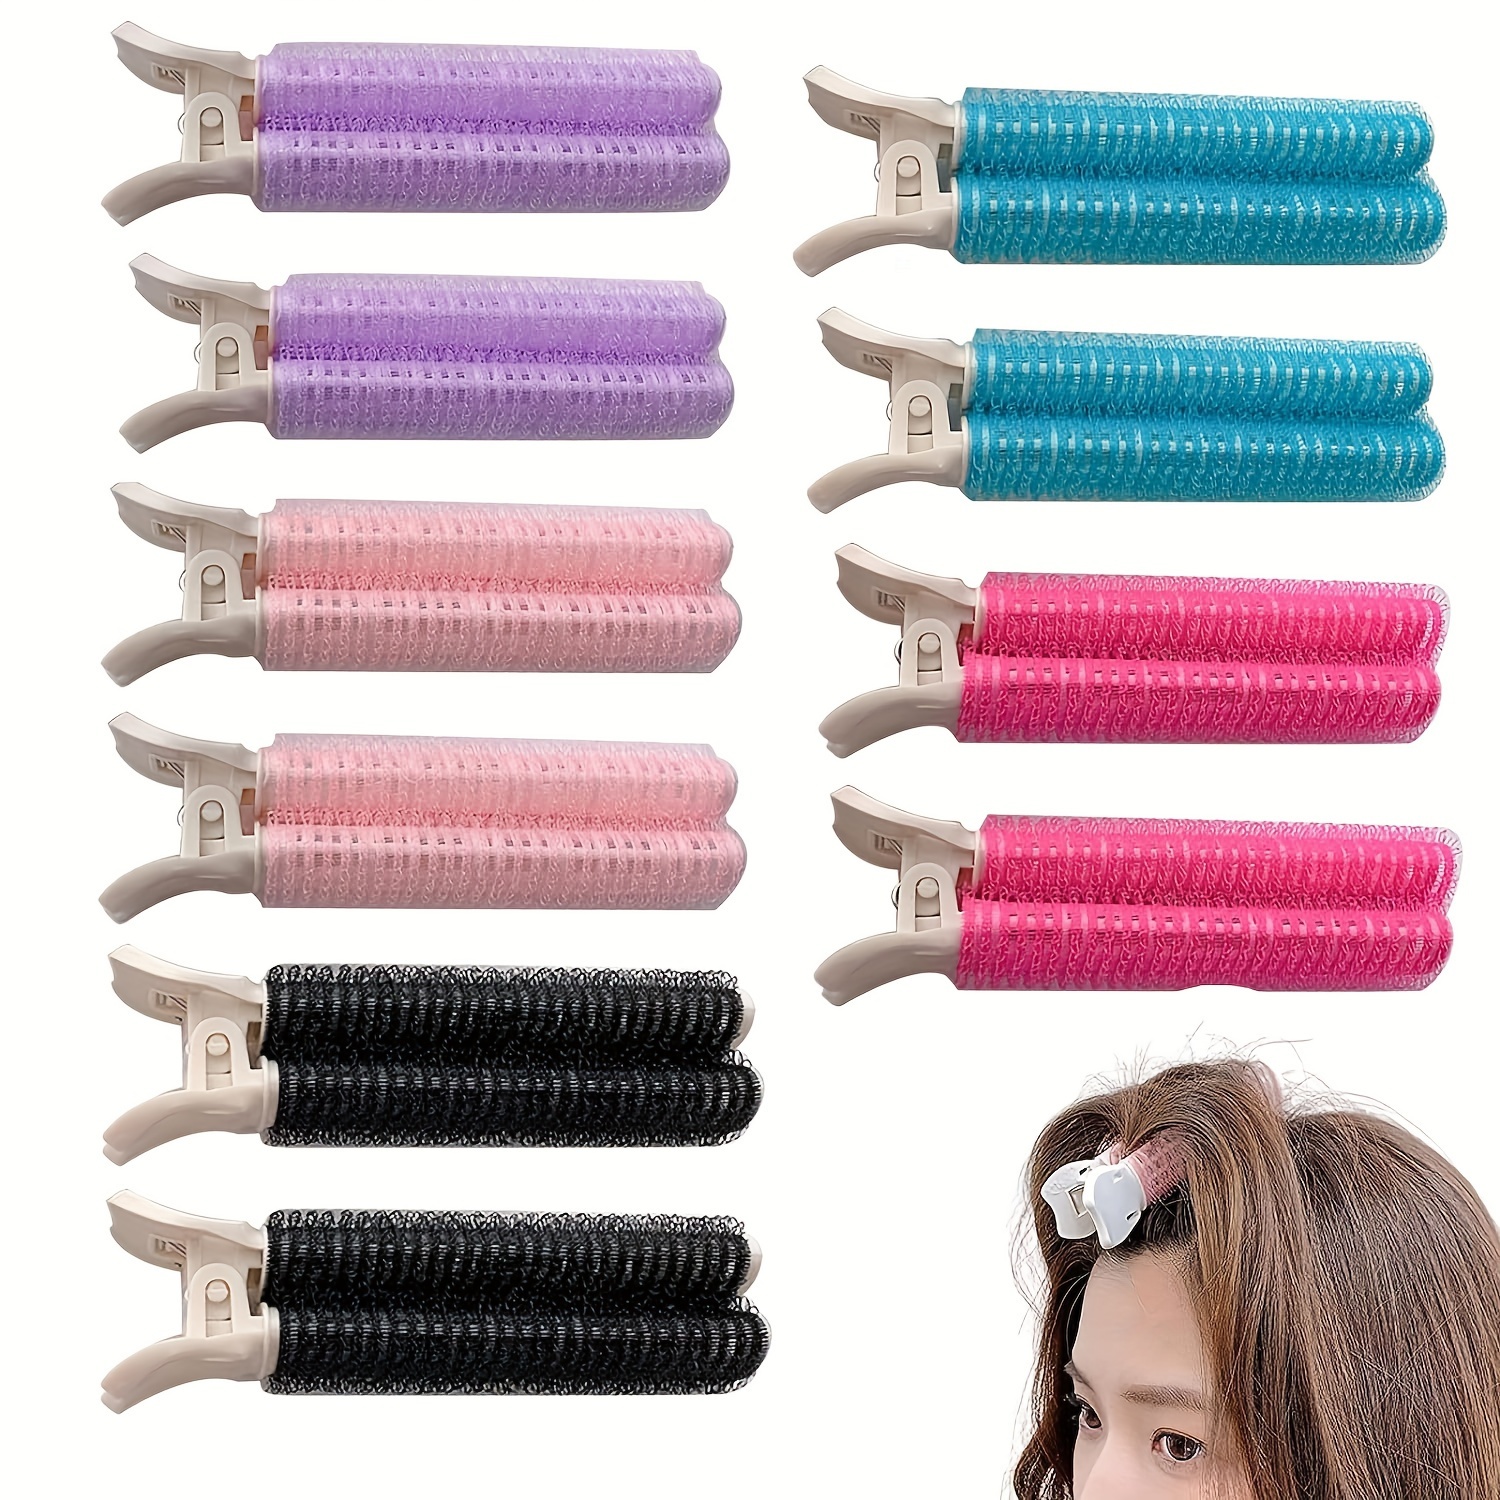 

10pcs/set Diy Hair Styling Accessories Kit Volumizing Hair Root Clips Fluffy Air Bangs Rollers Heatless Hair Curlers For Women And Daily Uses